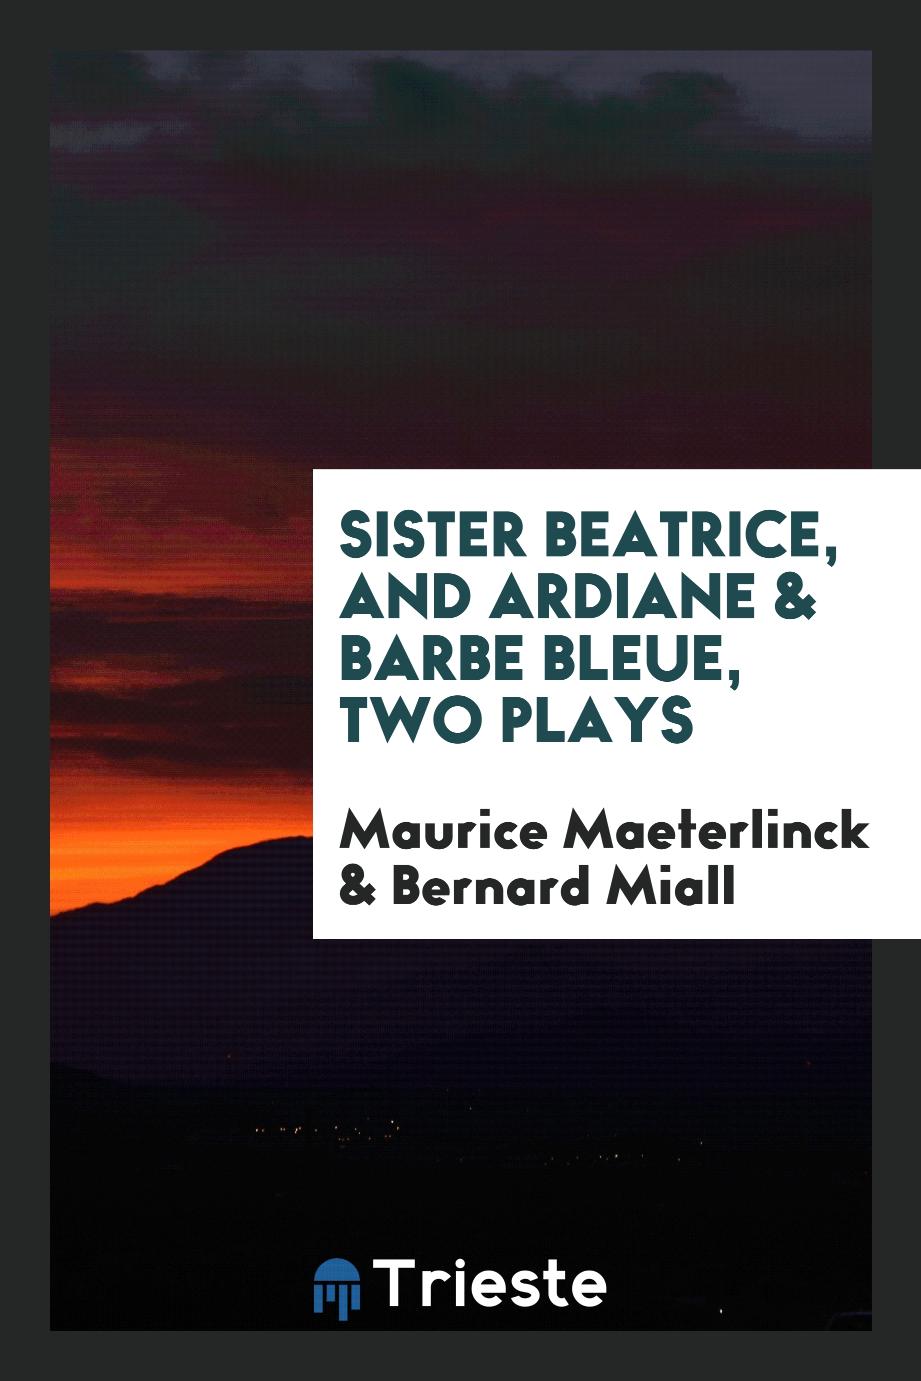 Sister Beatrice, and Ardiane & Barbe Bleue, two plays